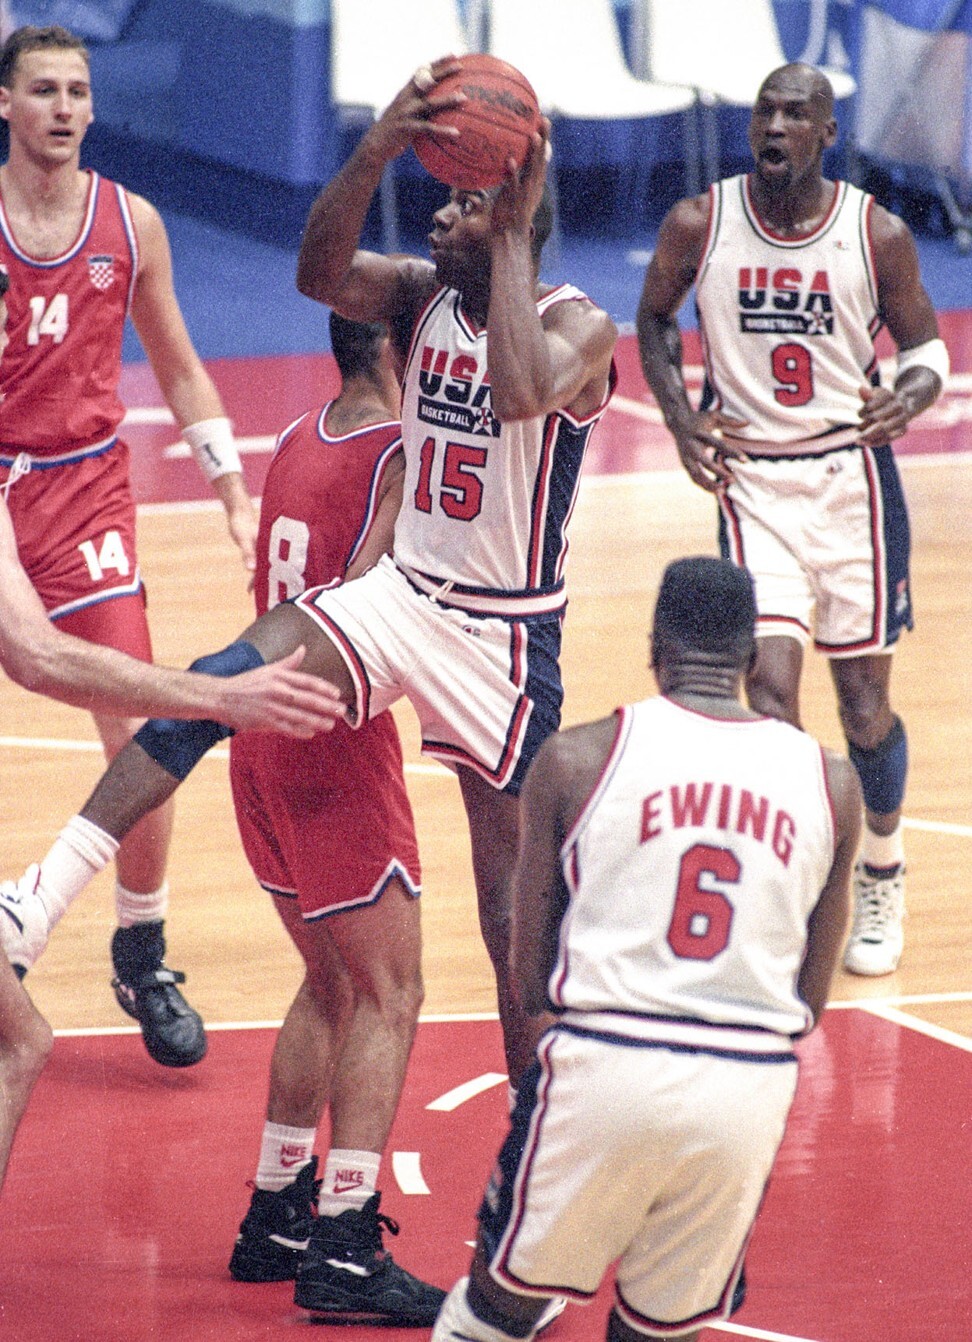 The 1992 US “Dream Team” is considered the greatest basketball team of all-time. Photo: Kyodo